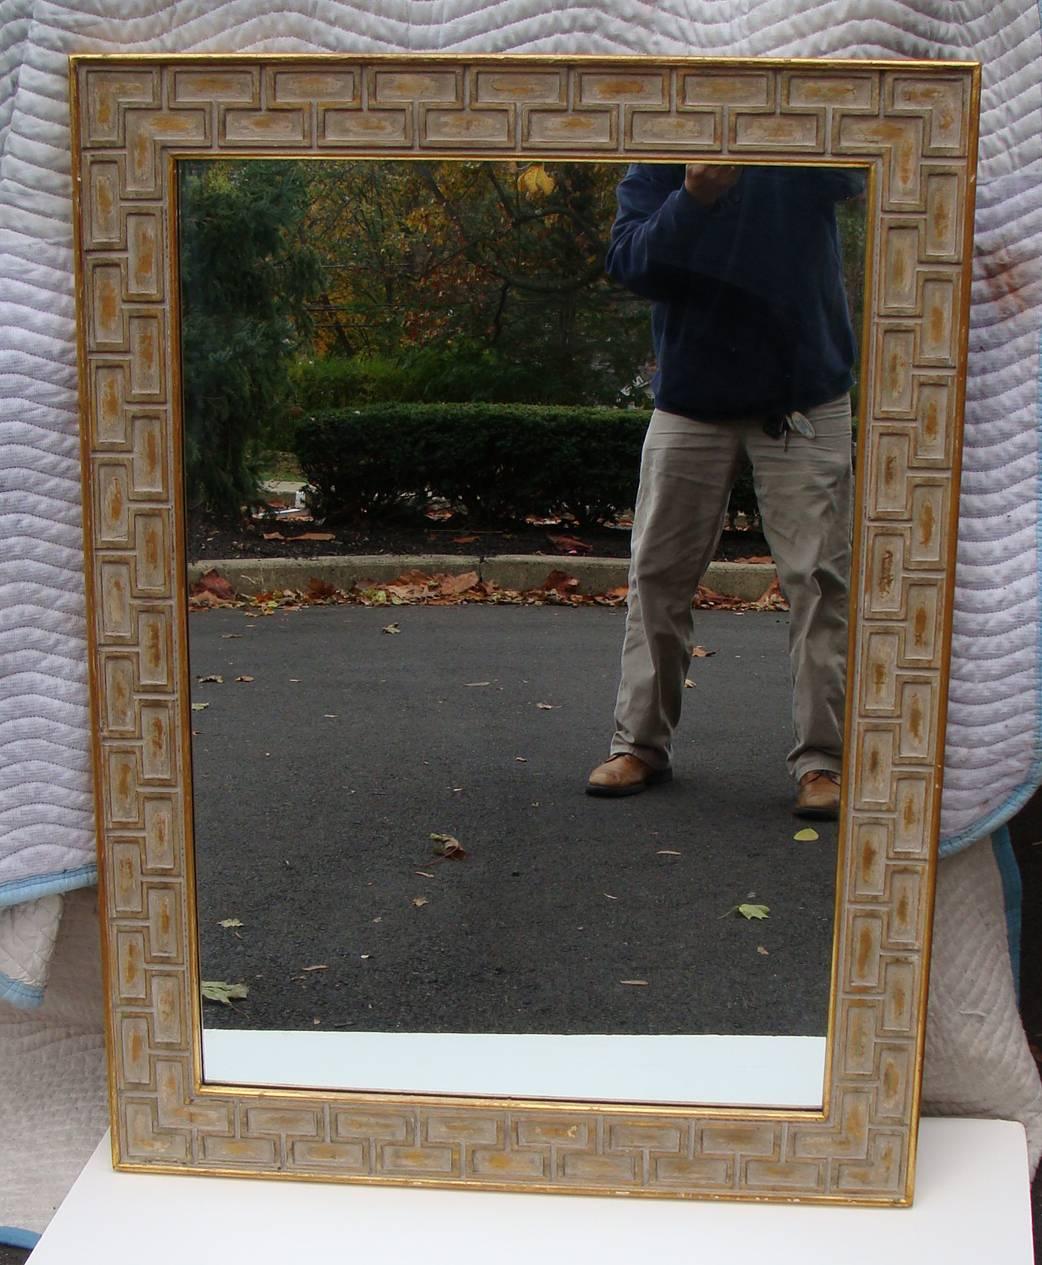 Authentic midcentury mirror.  Wood framing with terrific geometric carving
and finished with paint and gilding.  Always hung in vertical position but easily placed
on horizontal plane.  Strong architectural design which works well with multitude of